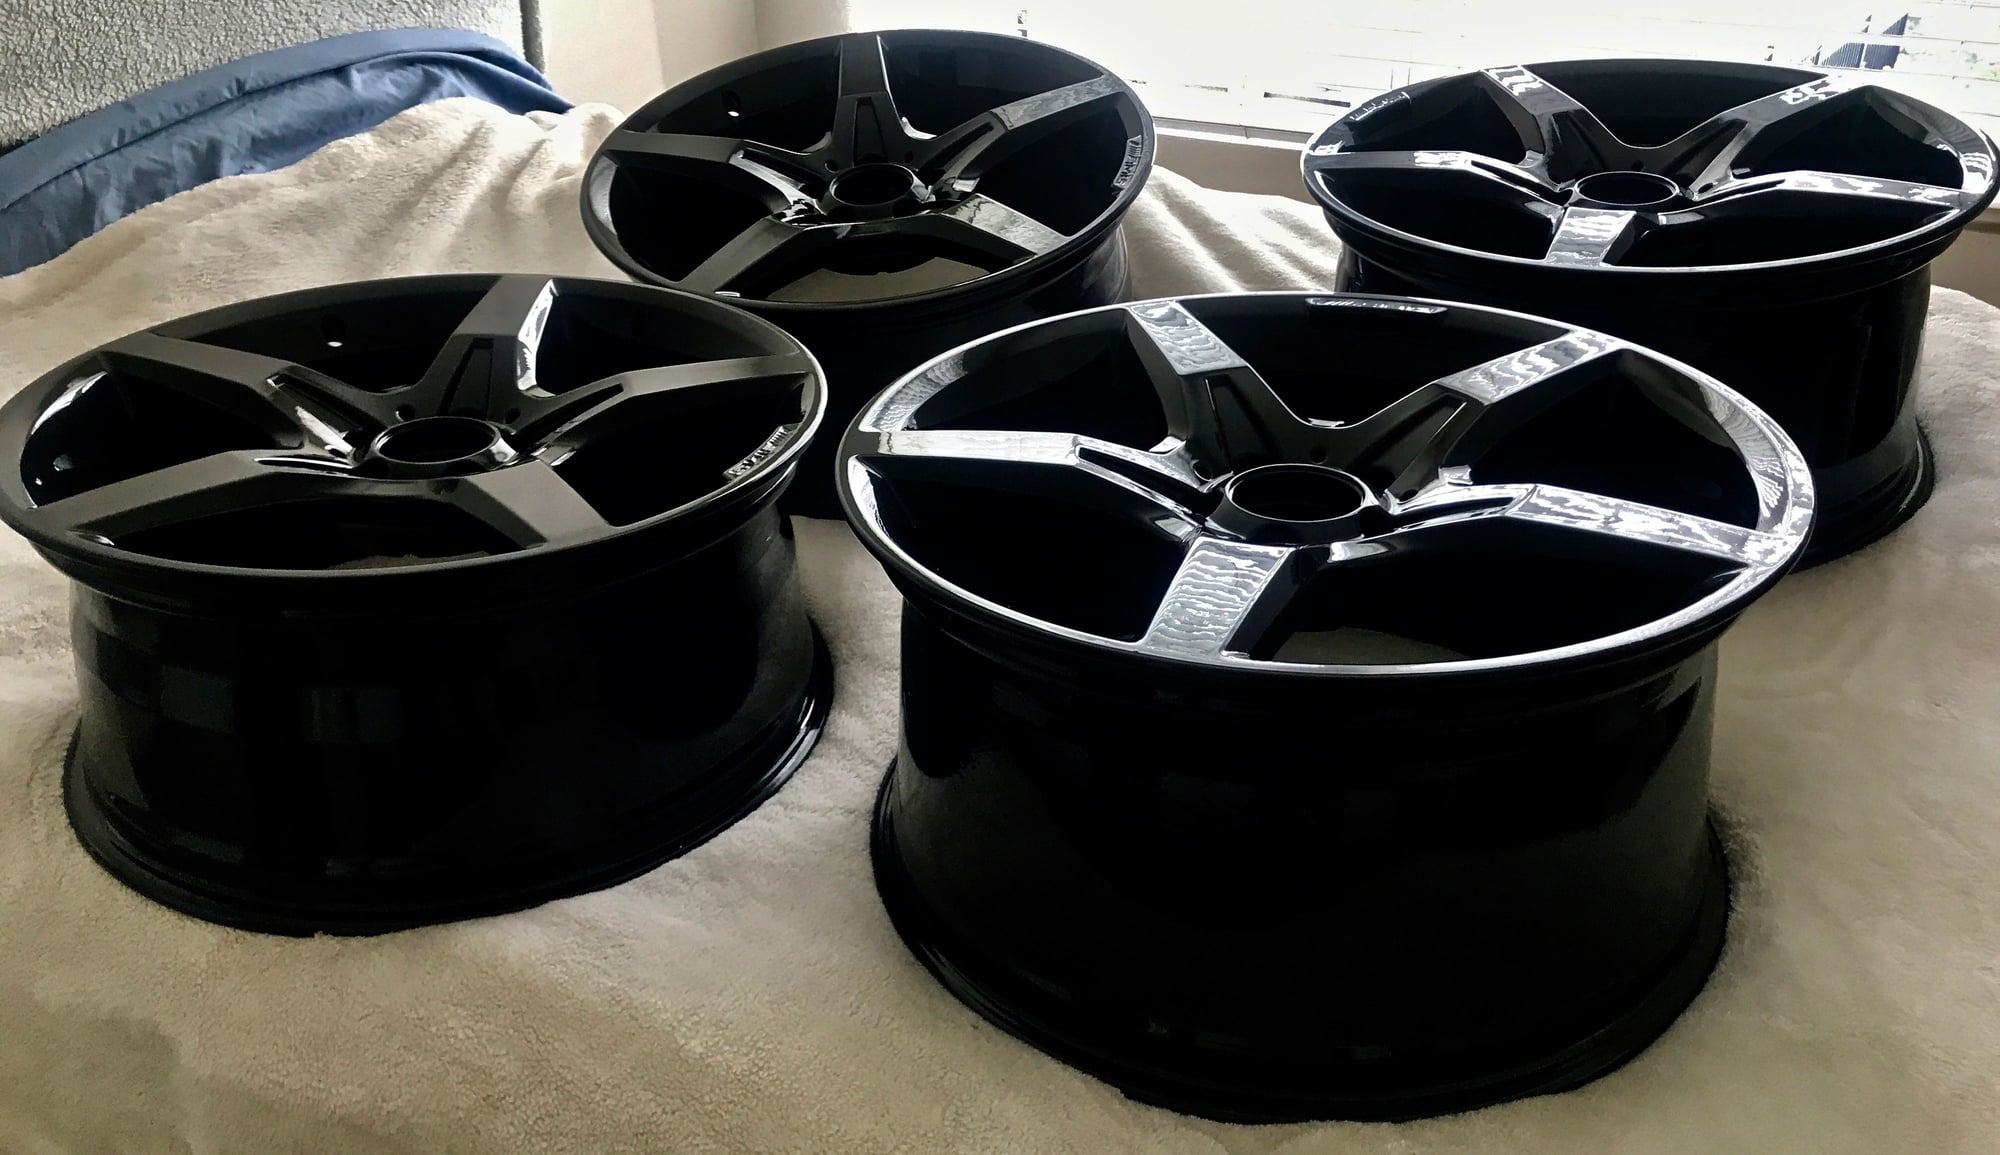 Wheels and Tires/Axles - AMG  19" Gloss Black Wheels  off a 2013 SL550 - Used - Westbury, NY 11590, United States